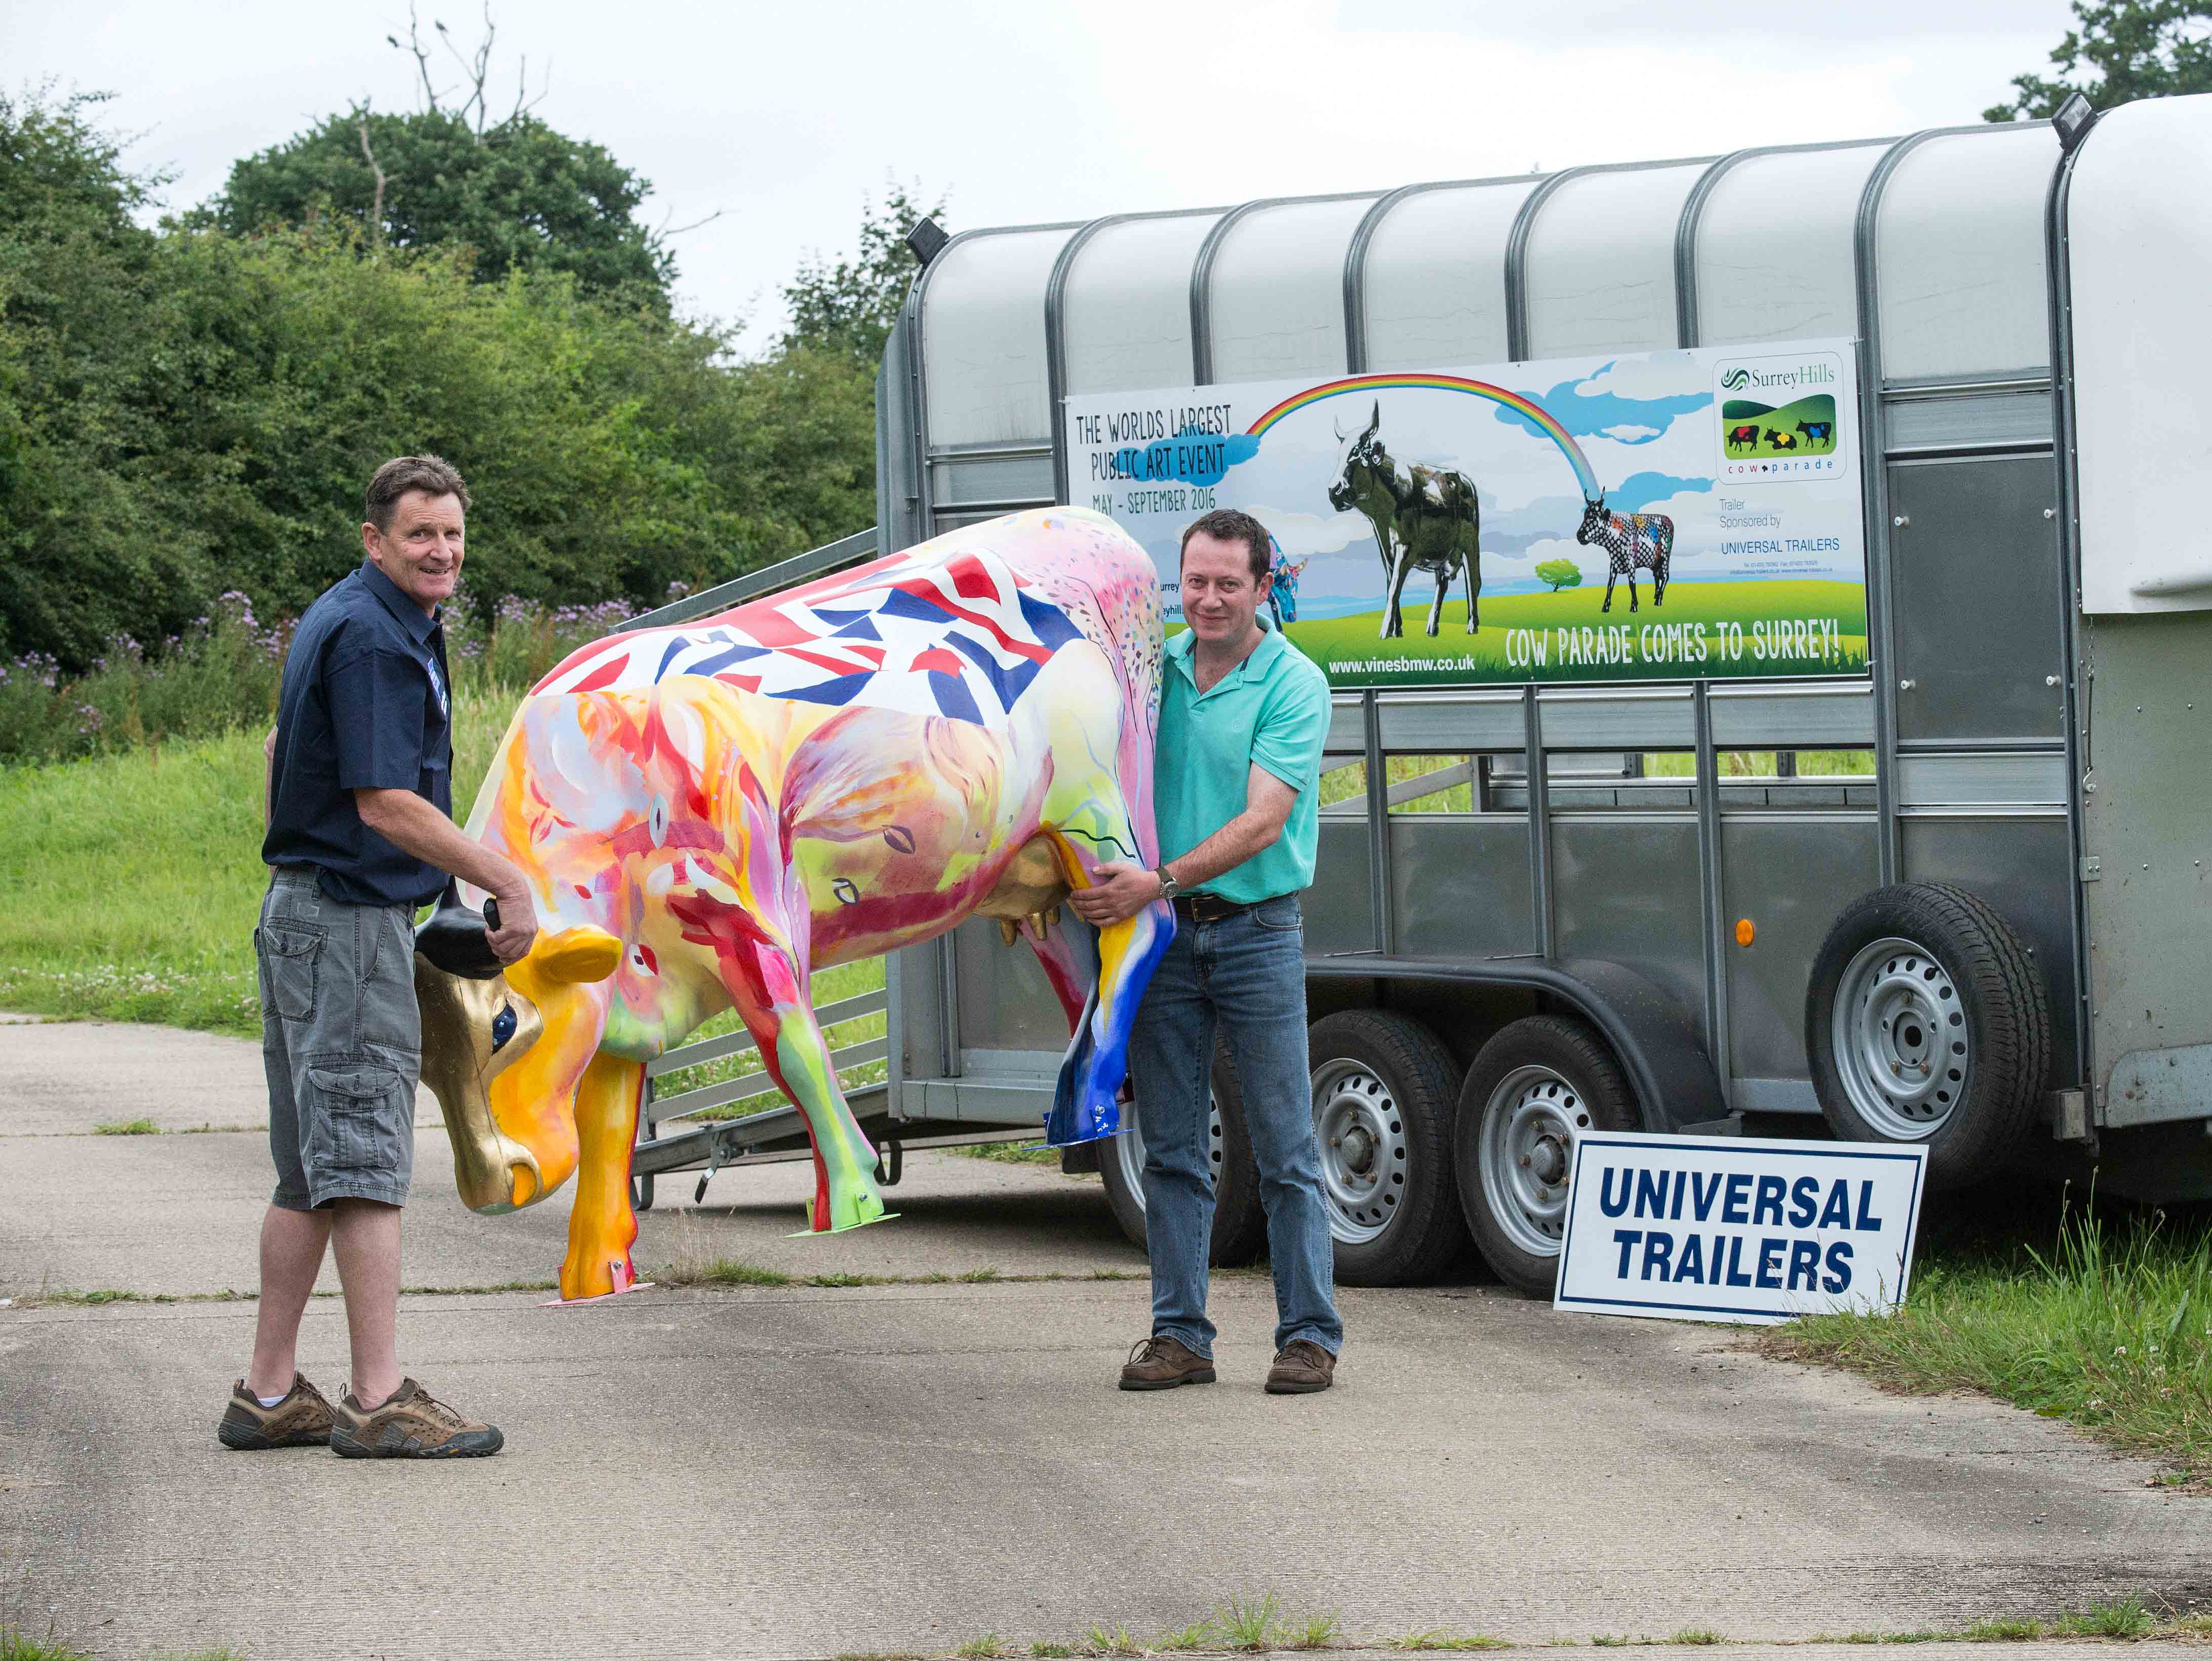 Designer cows on the ‘moove’ thanks to top trailer firm